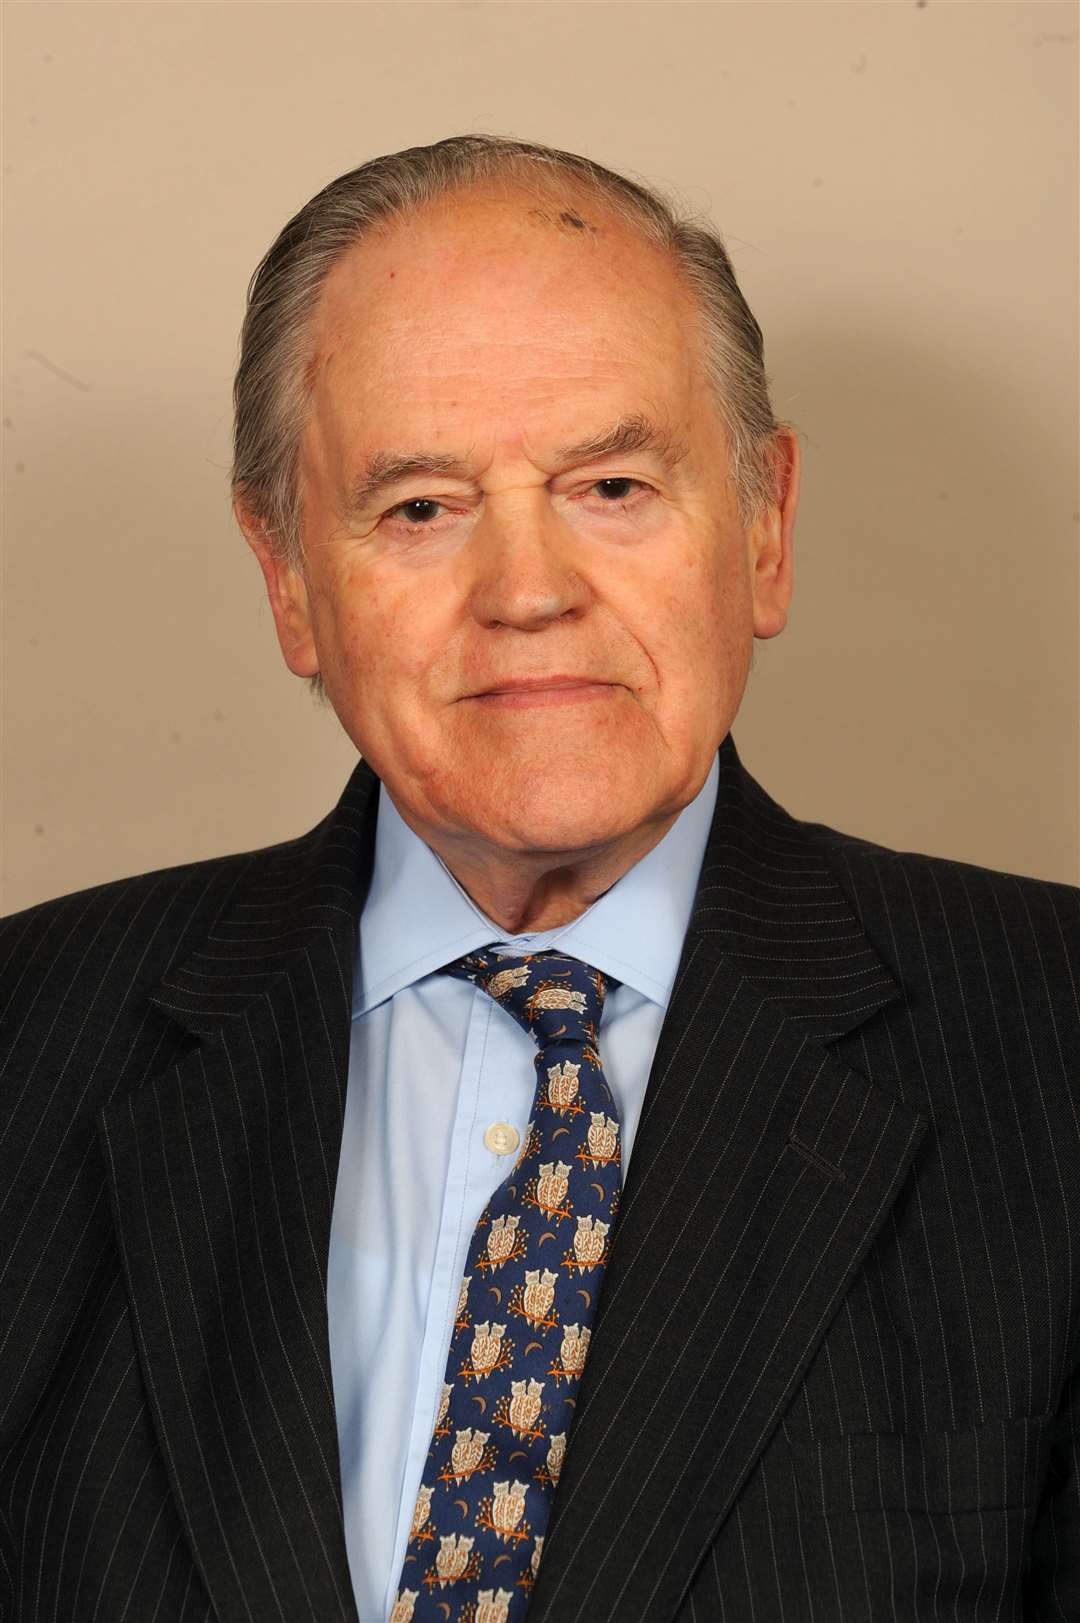 Lord Armstrong, pictured in 2009, served in the governments of Ted Heath, Harold Wilson and Margaret Thatcher (PA)